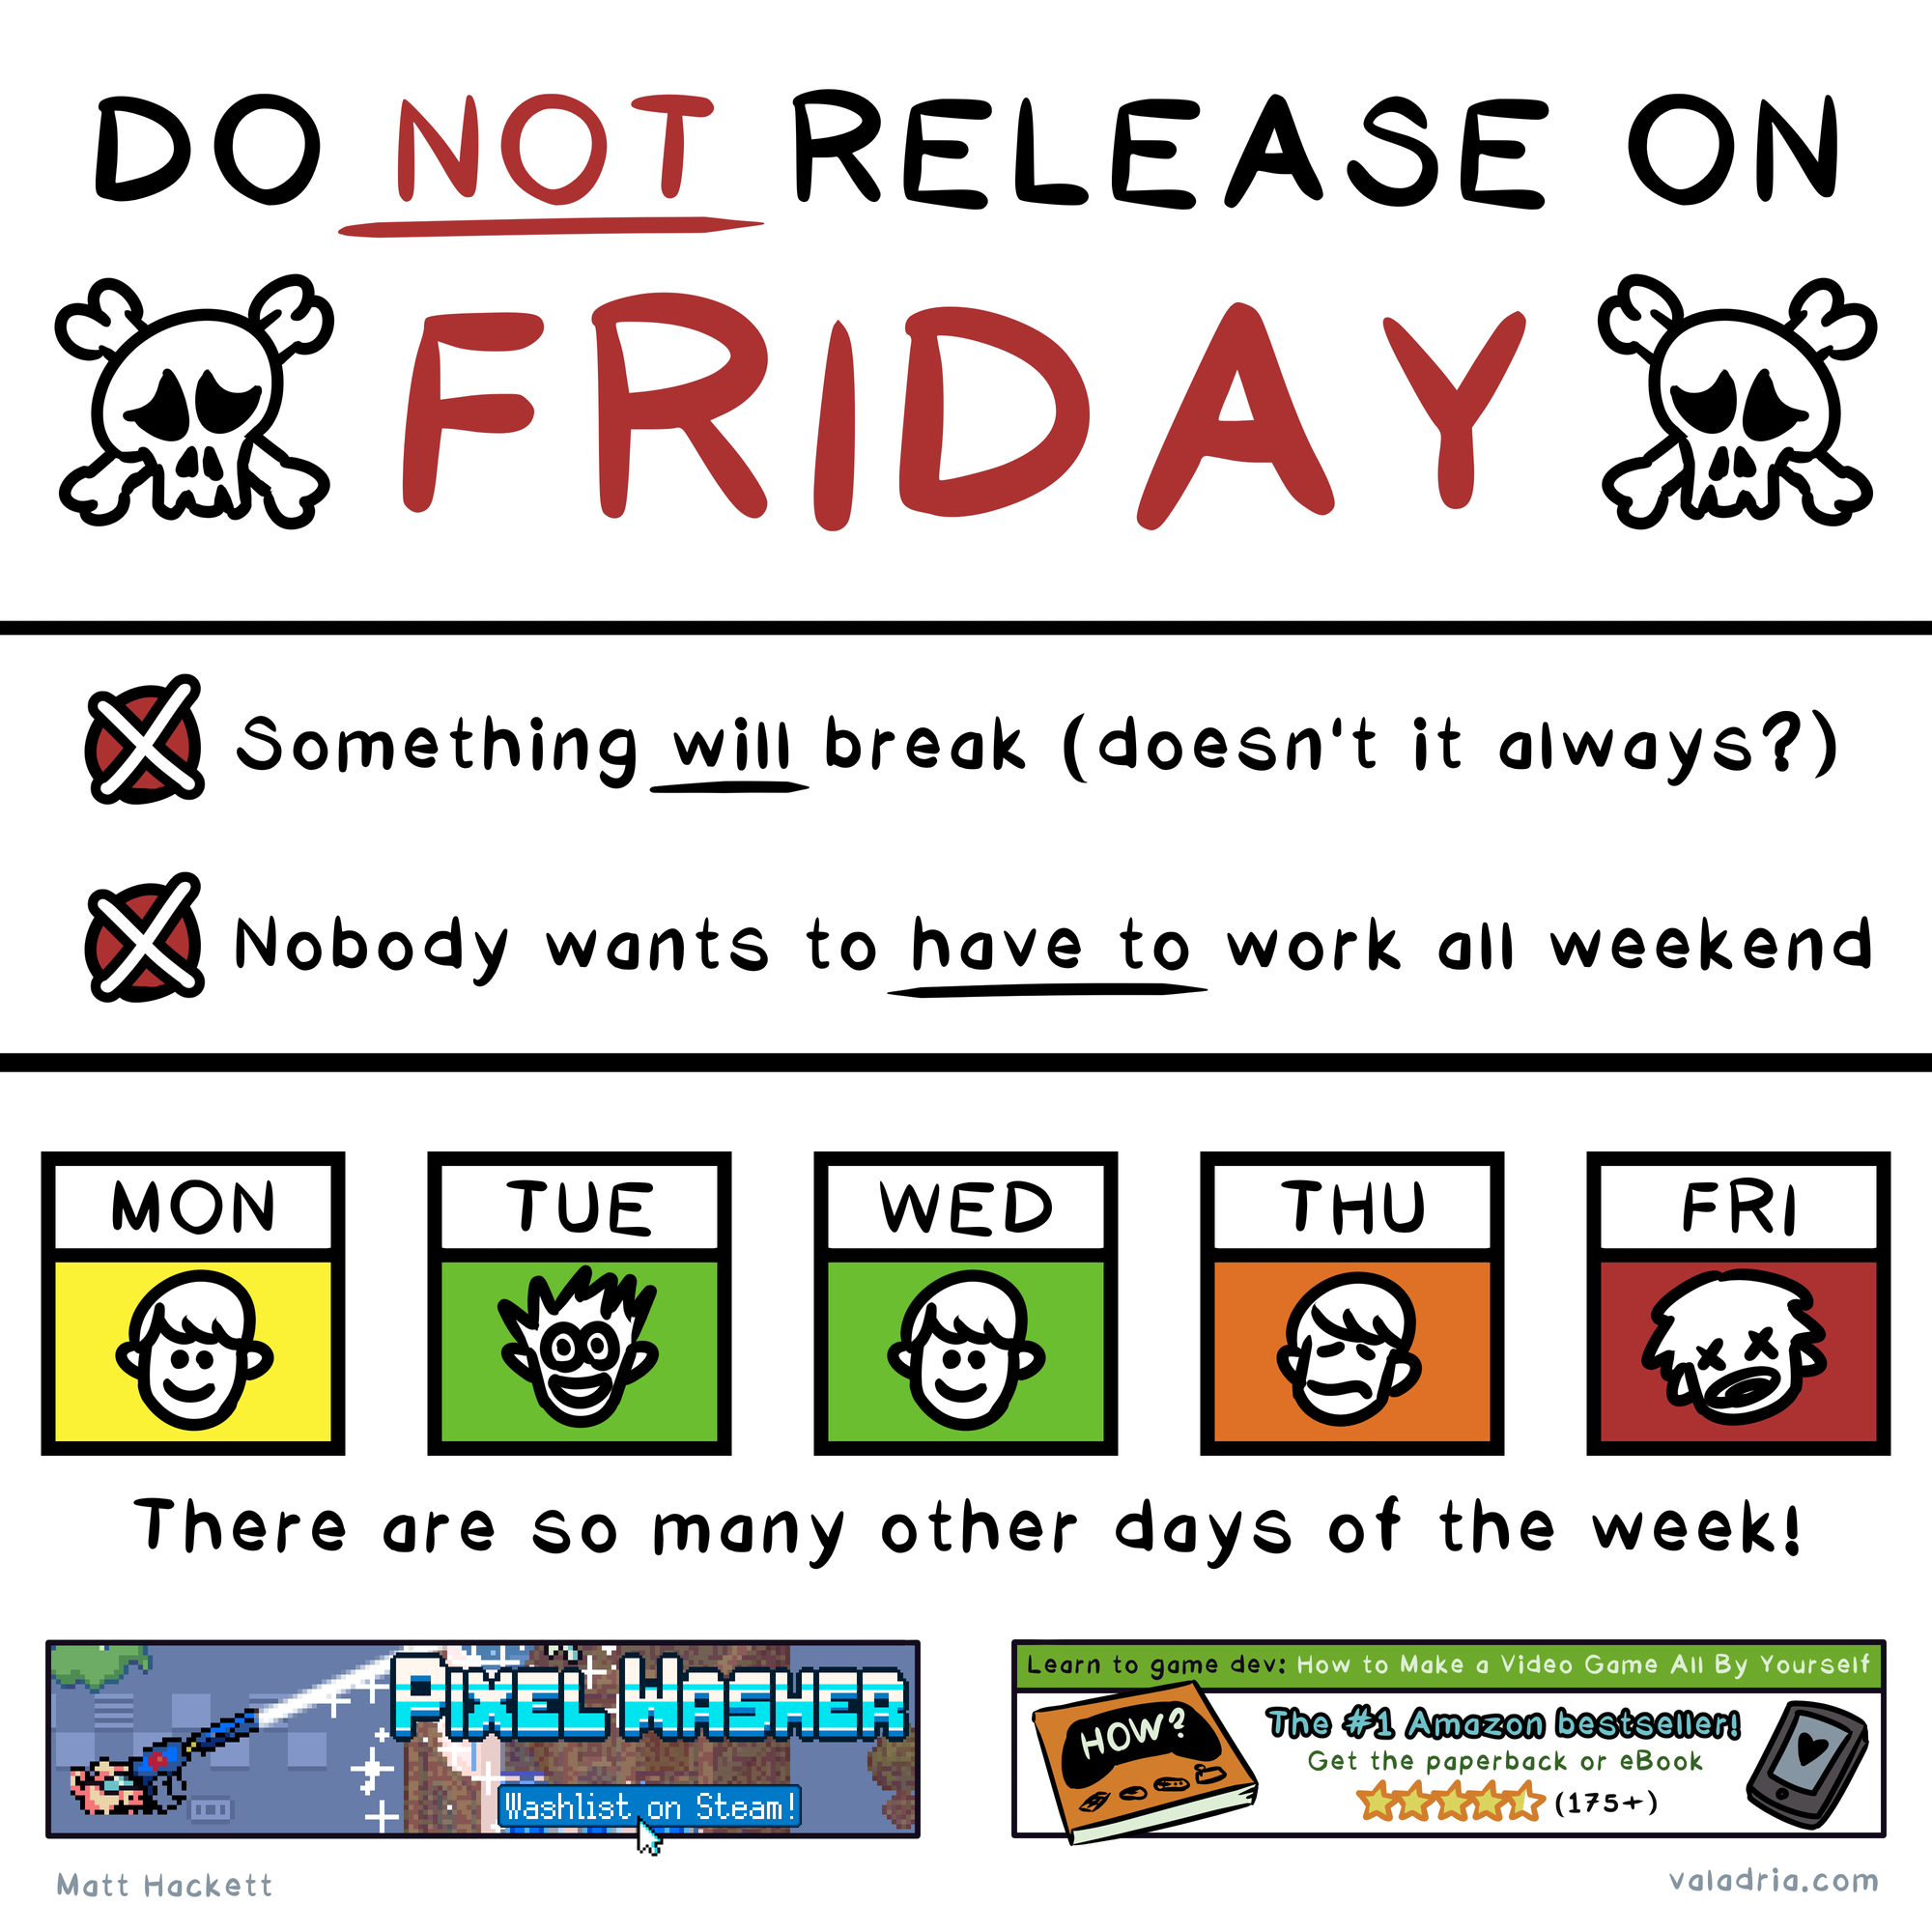 DO NOT RELEASE ON FRIDAY Something will break (doesn't it always?) Nobody wants to have to work all weekend There are so many other days of the week! Matt Hackett valadria.com